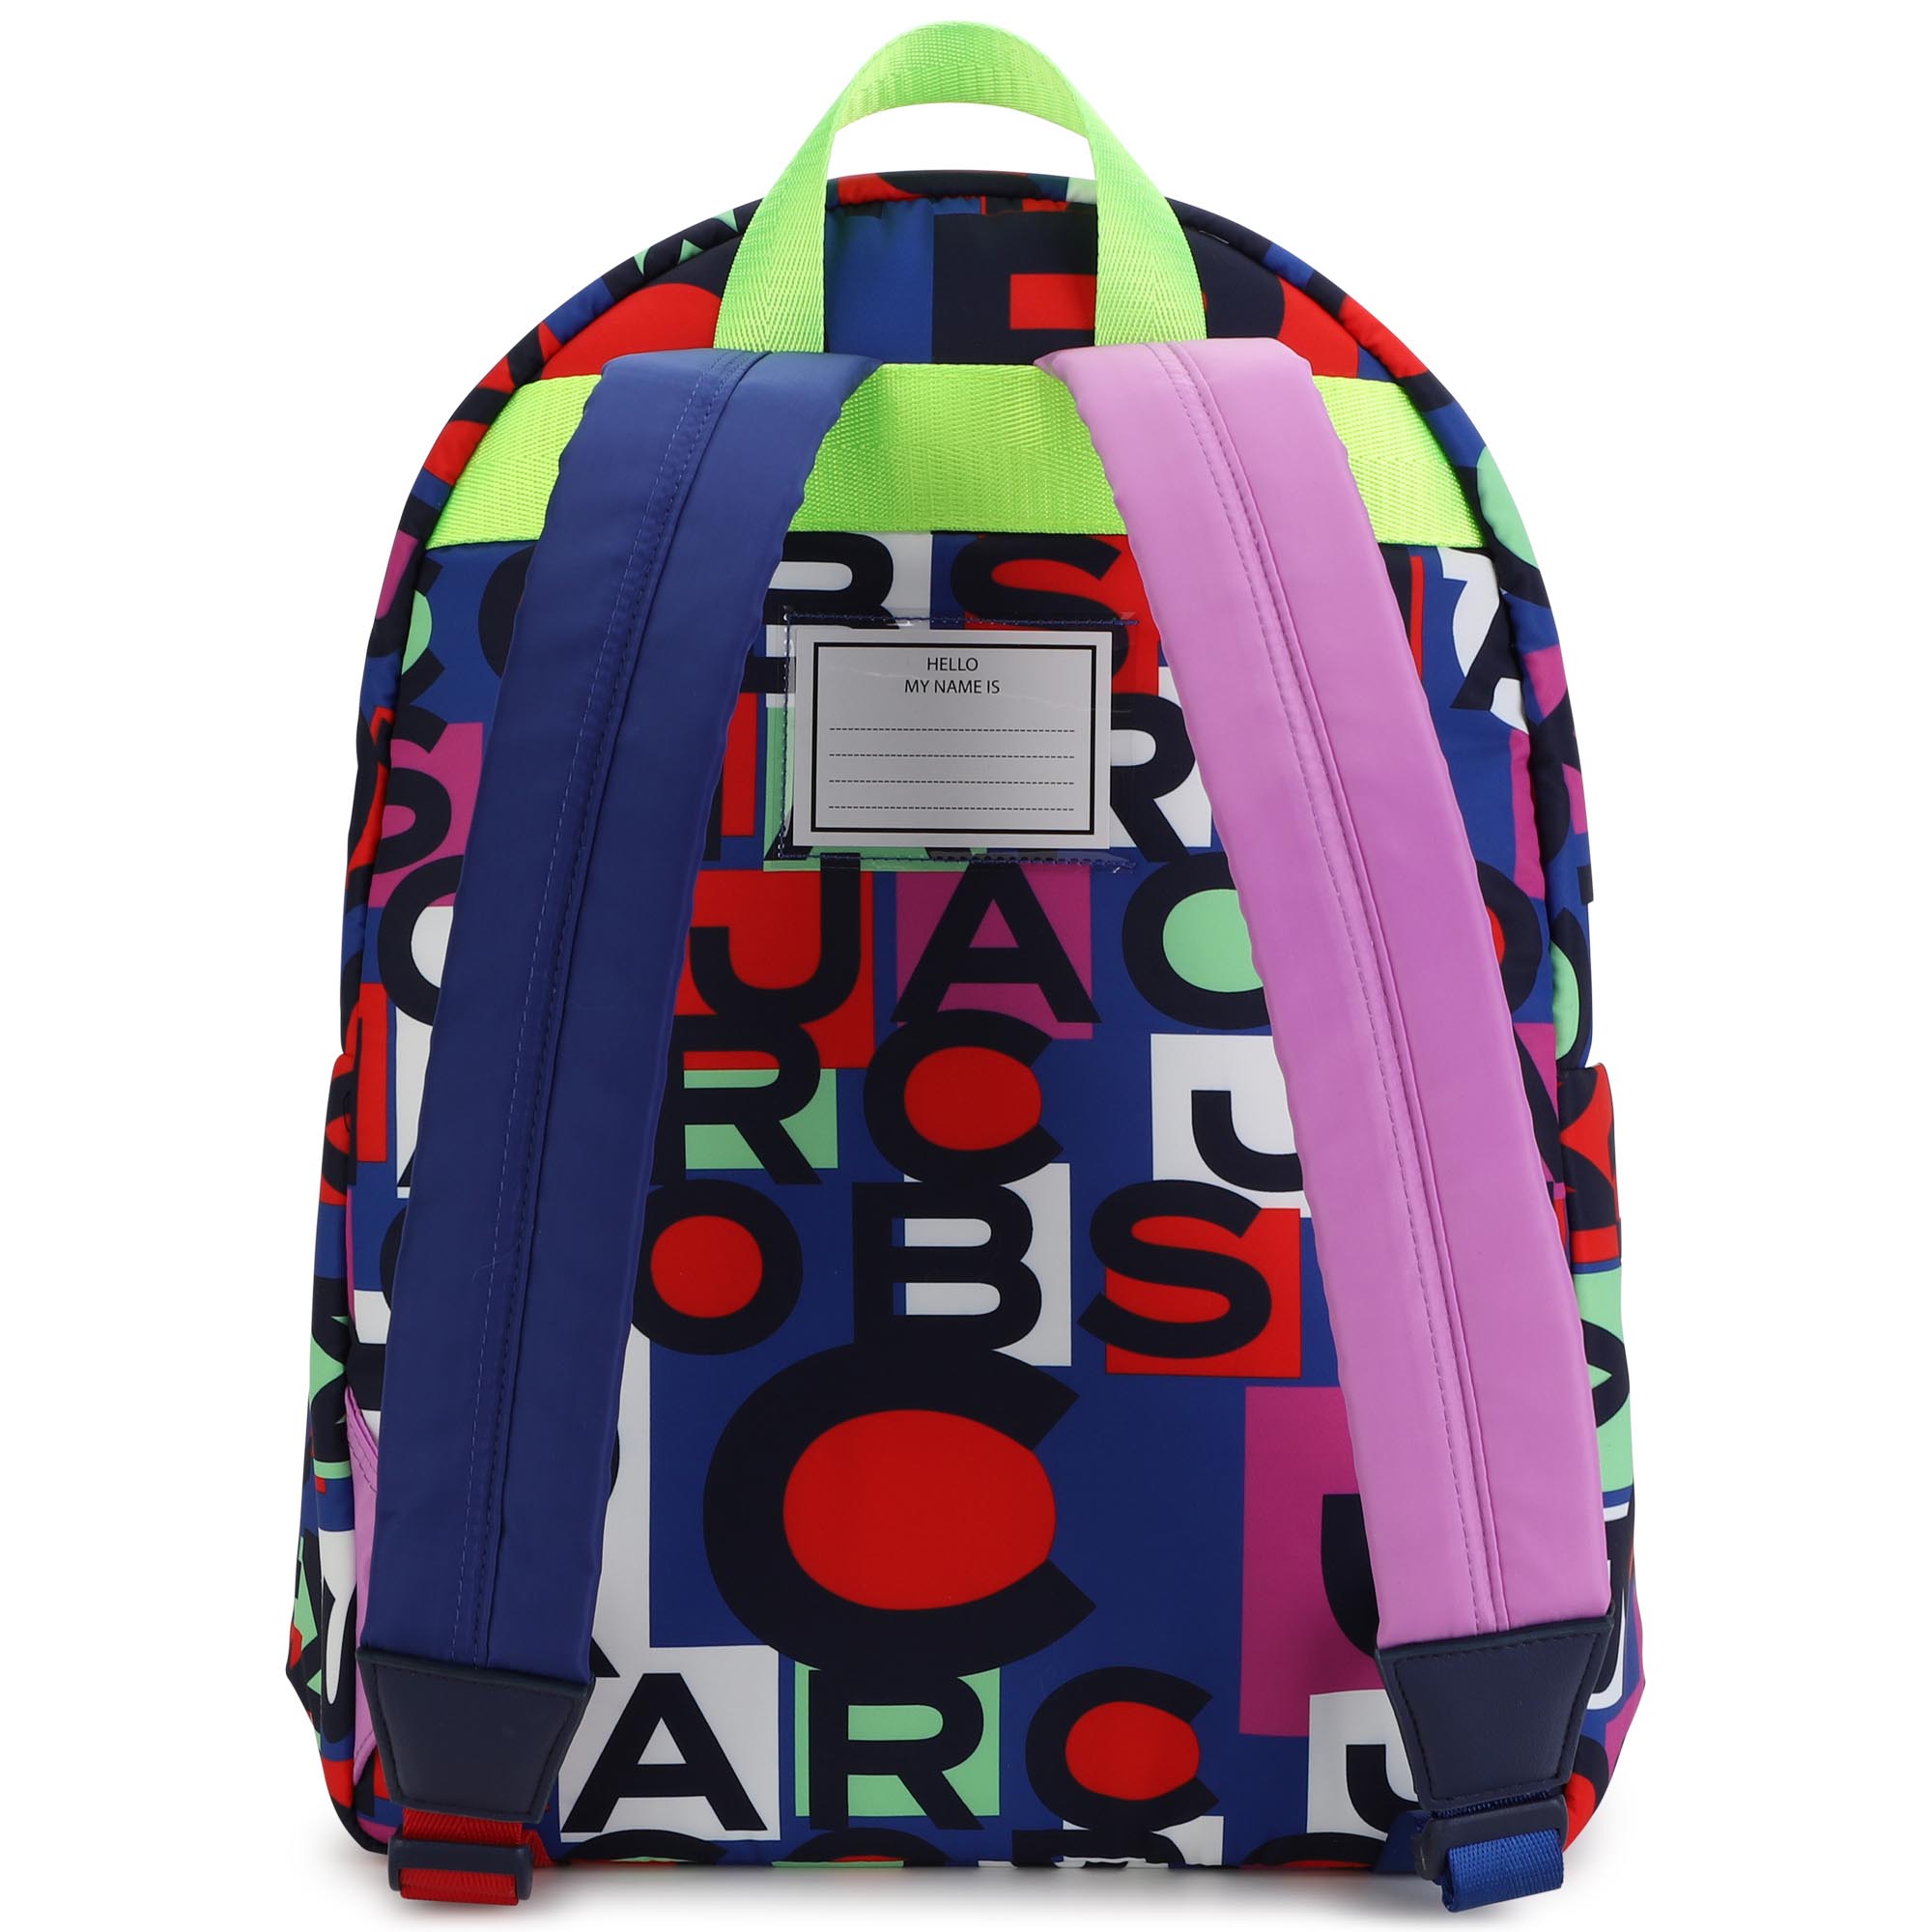 "THE BACKPACK" MARC JACOBS for BOY